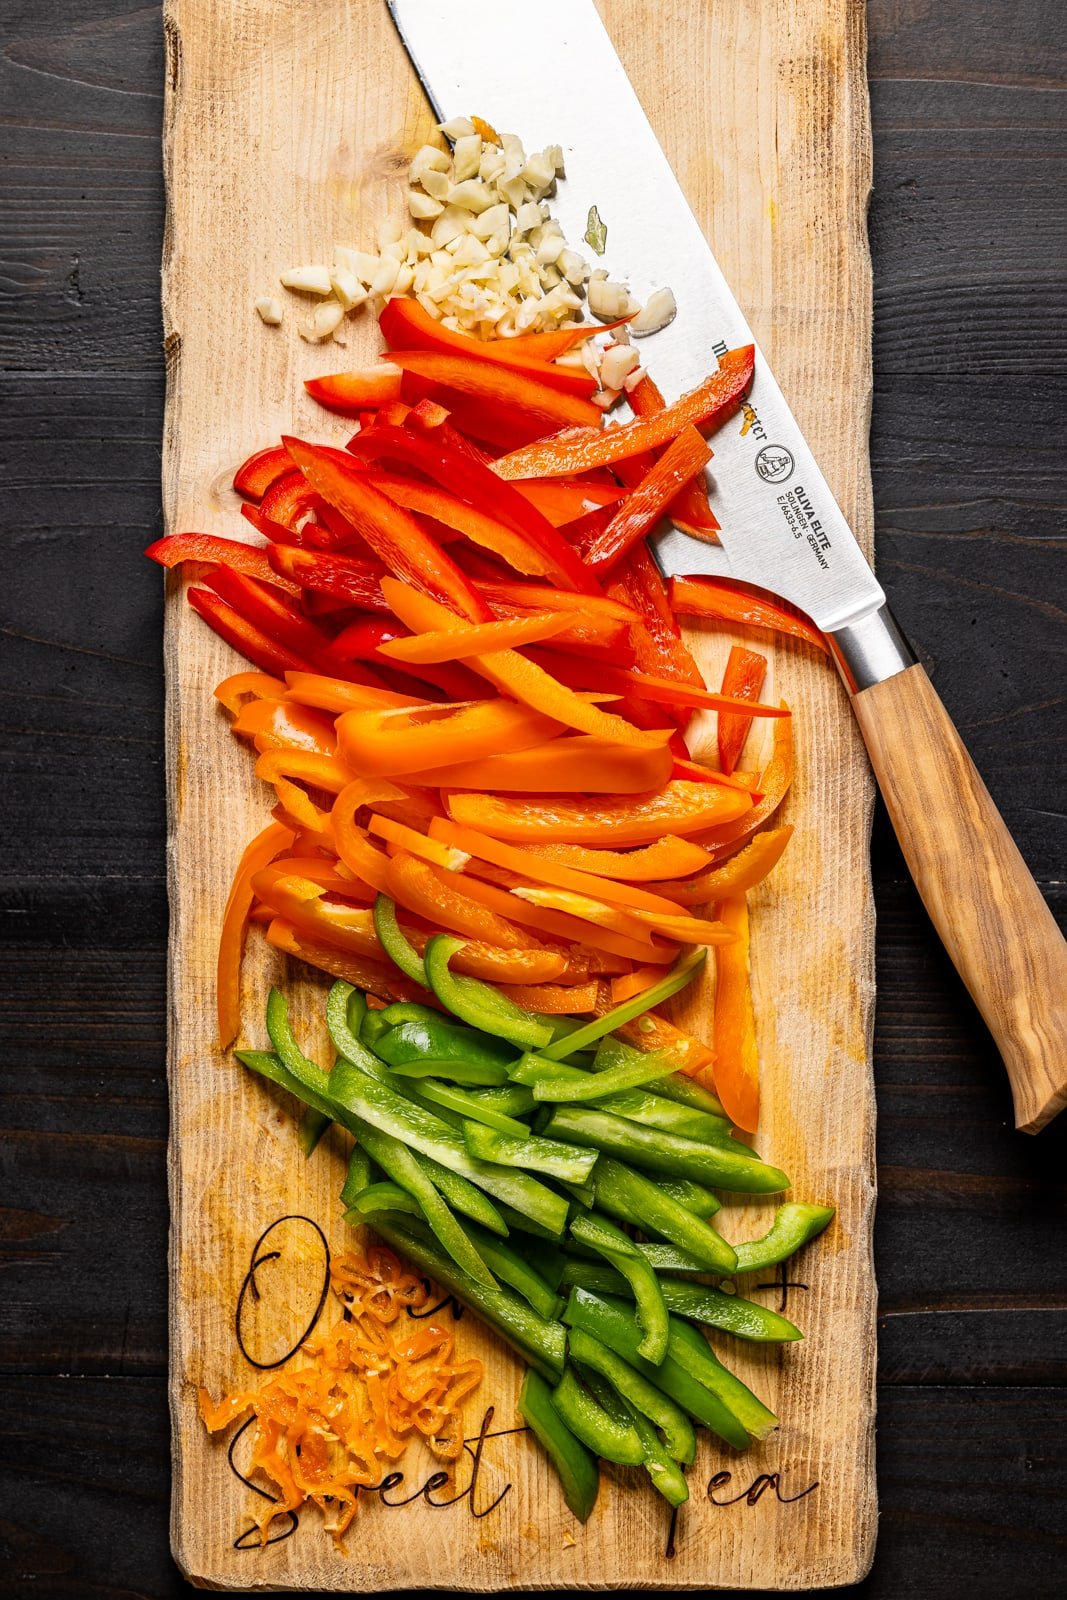 Chopped veggies on a cutting board with a knife.